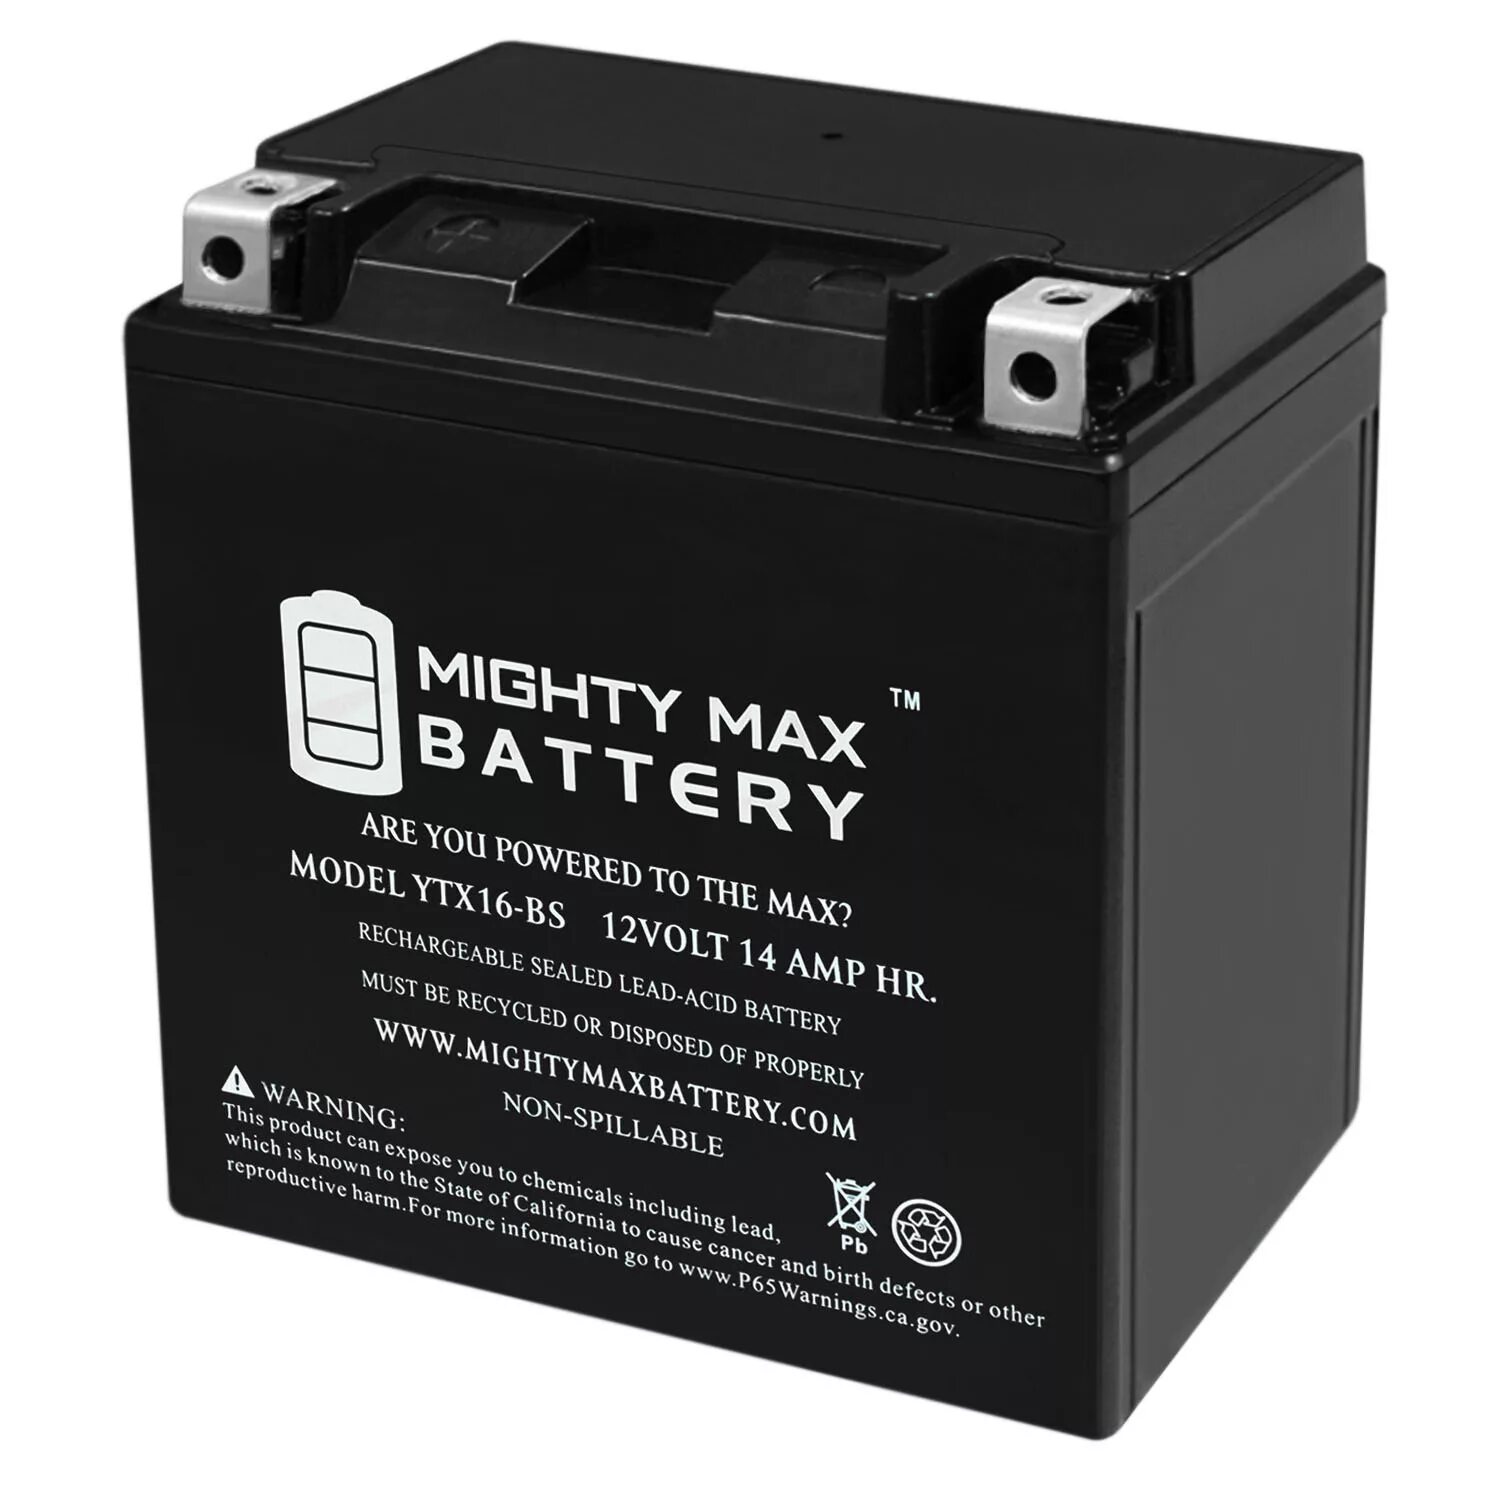 Yamaha Grizzly 125 аккумулятор. Power Sport Battery 16-4 12v14ah 230cca. Ytx14-BS. Аккумулятор Grizzly 63.